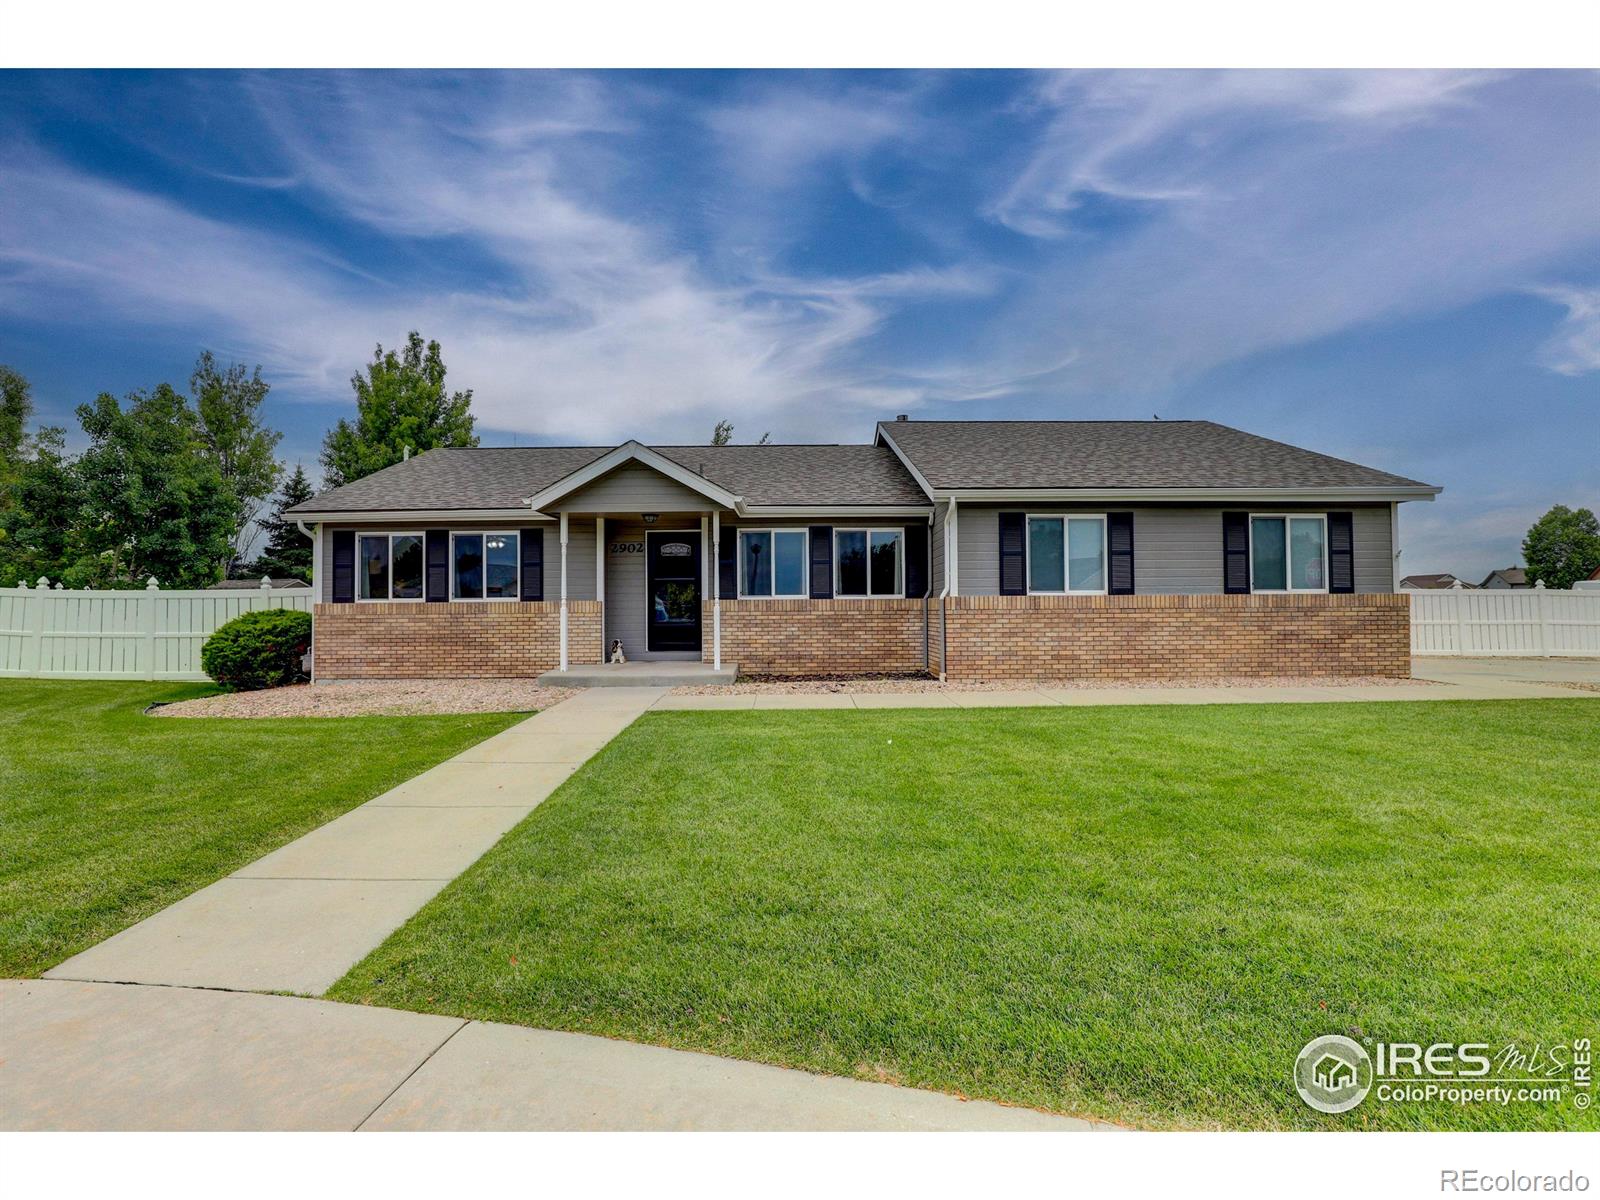 2902  41st Avenue, greeley MLS: 123456789991605 Beds: 5 Baths: 3 Price: $485,000